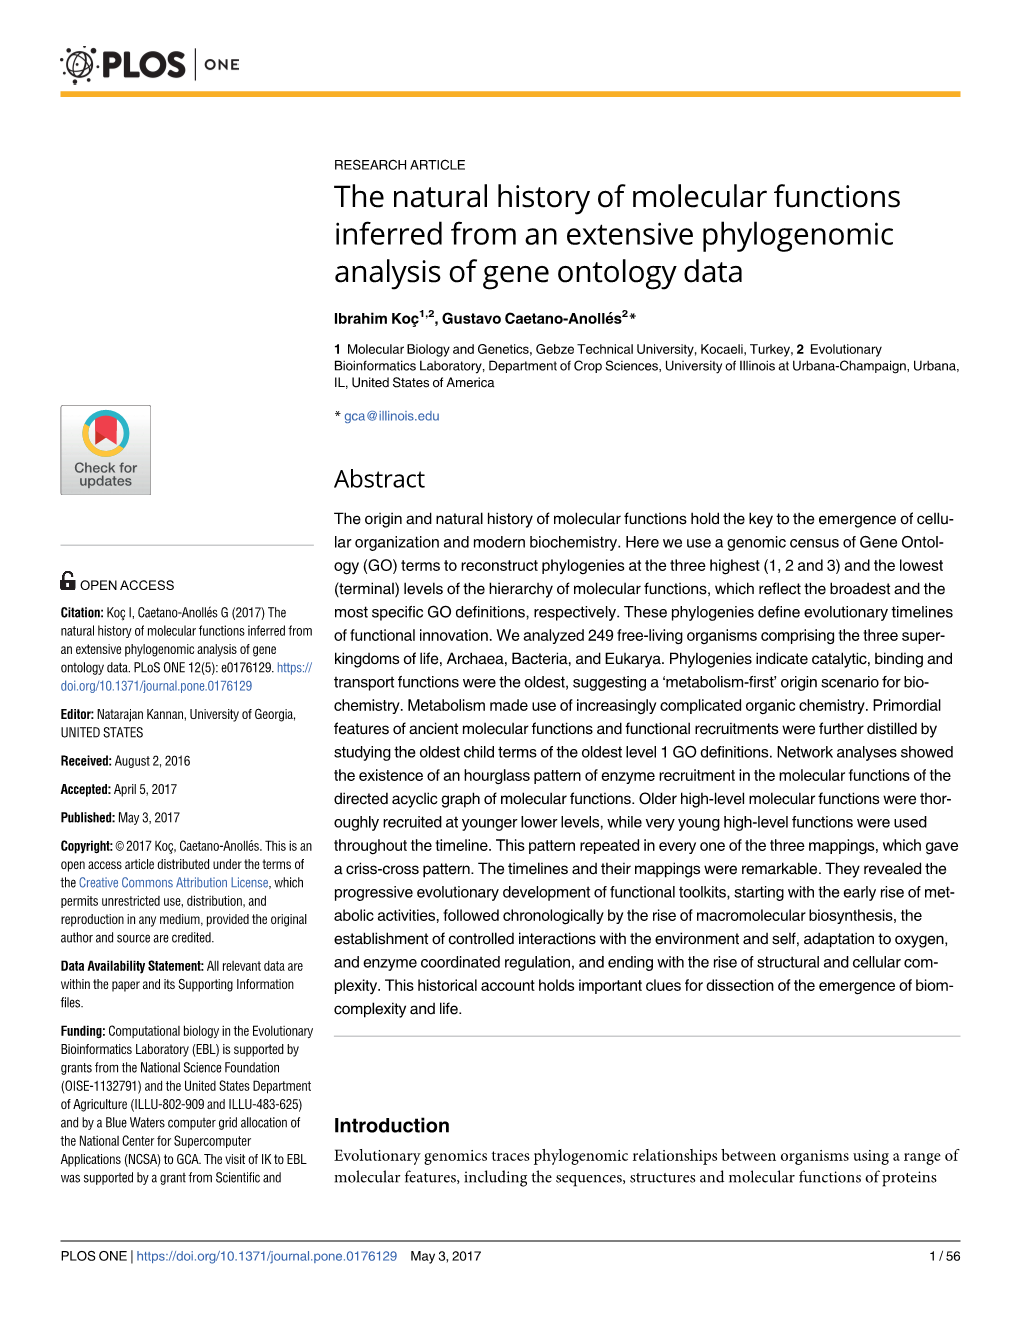 The Natural History of Molecular Functions Inferred from an Extensive Phylogenomic Analysis of Gene Ontology Data